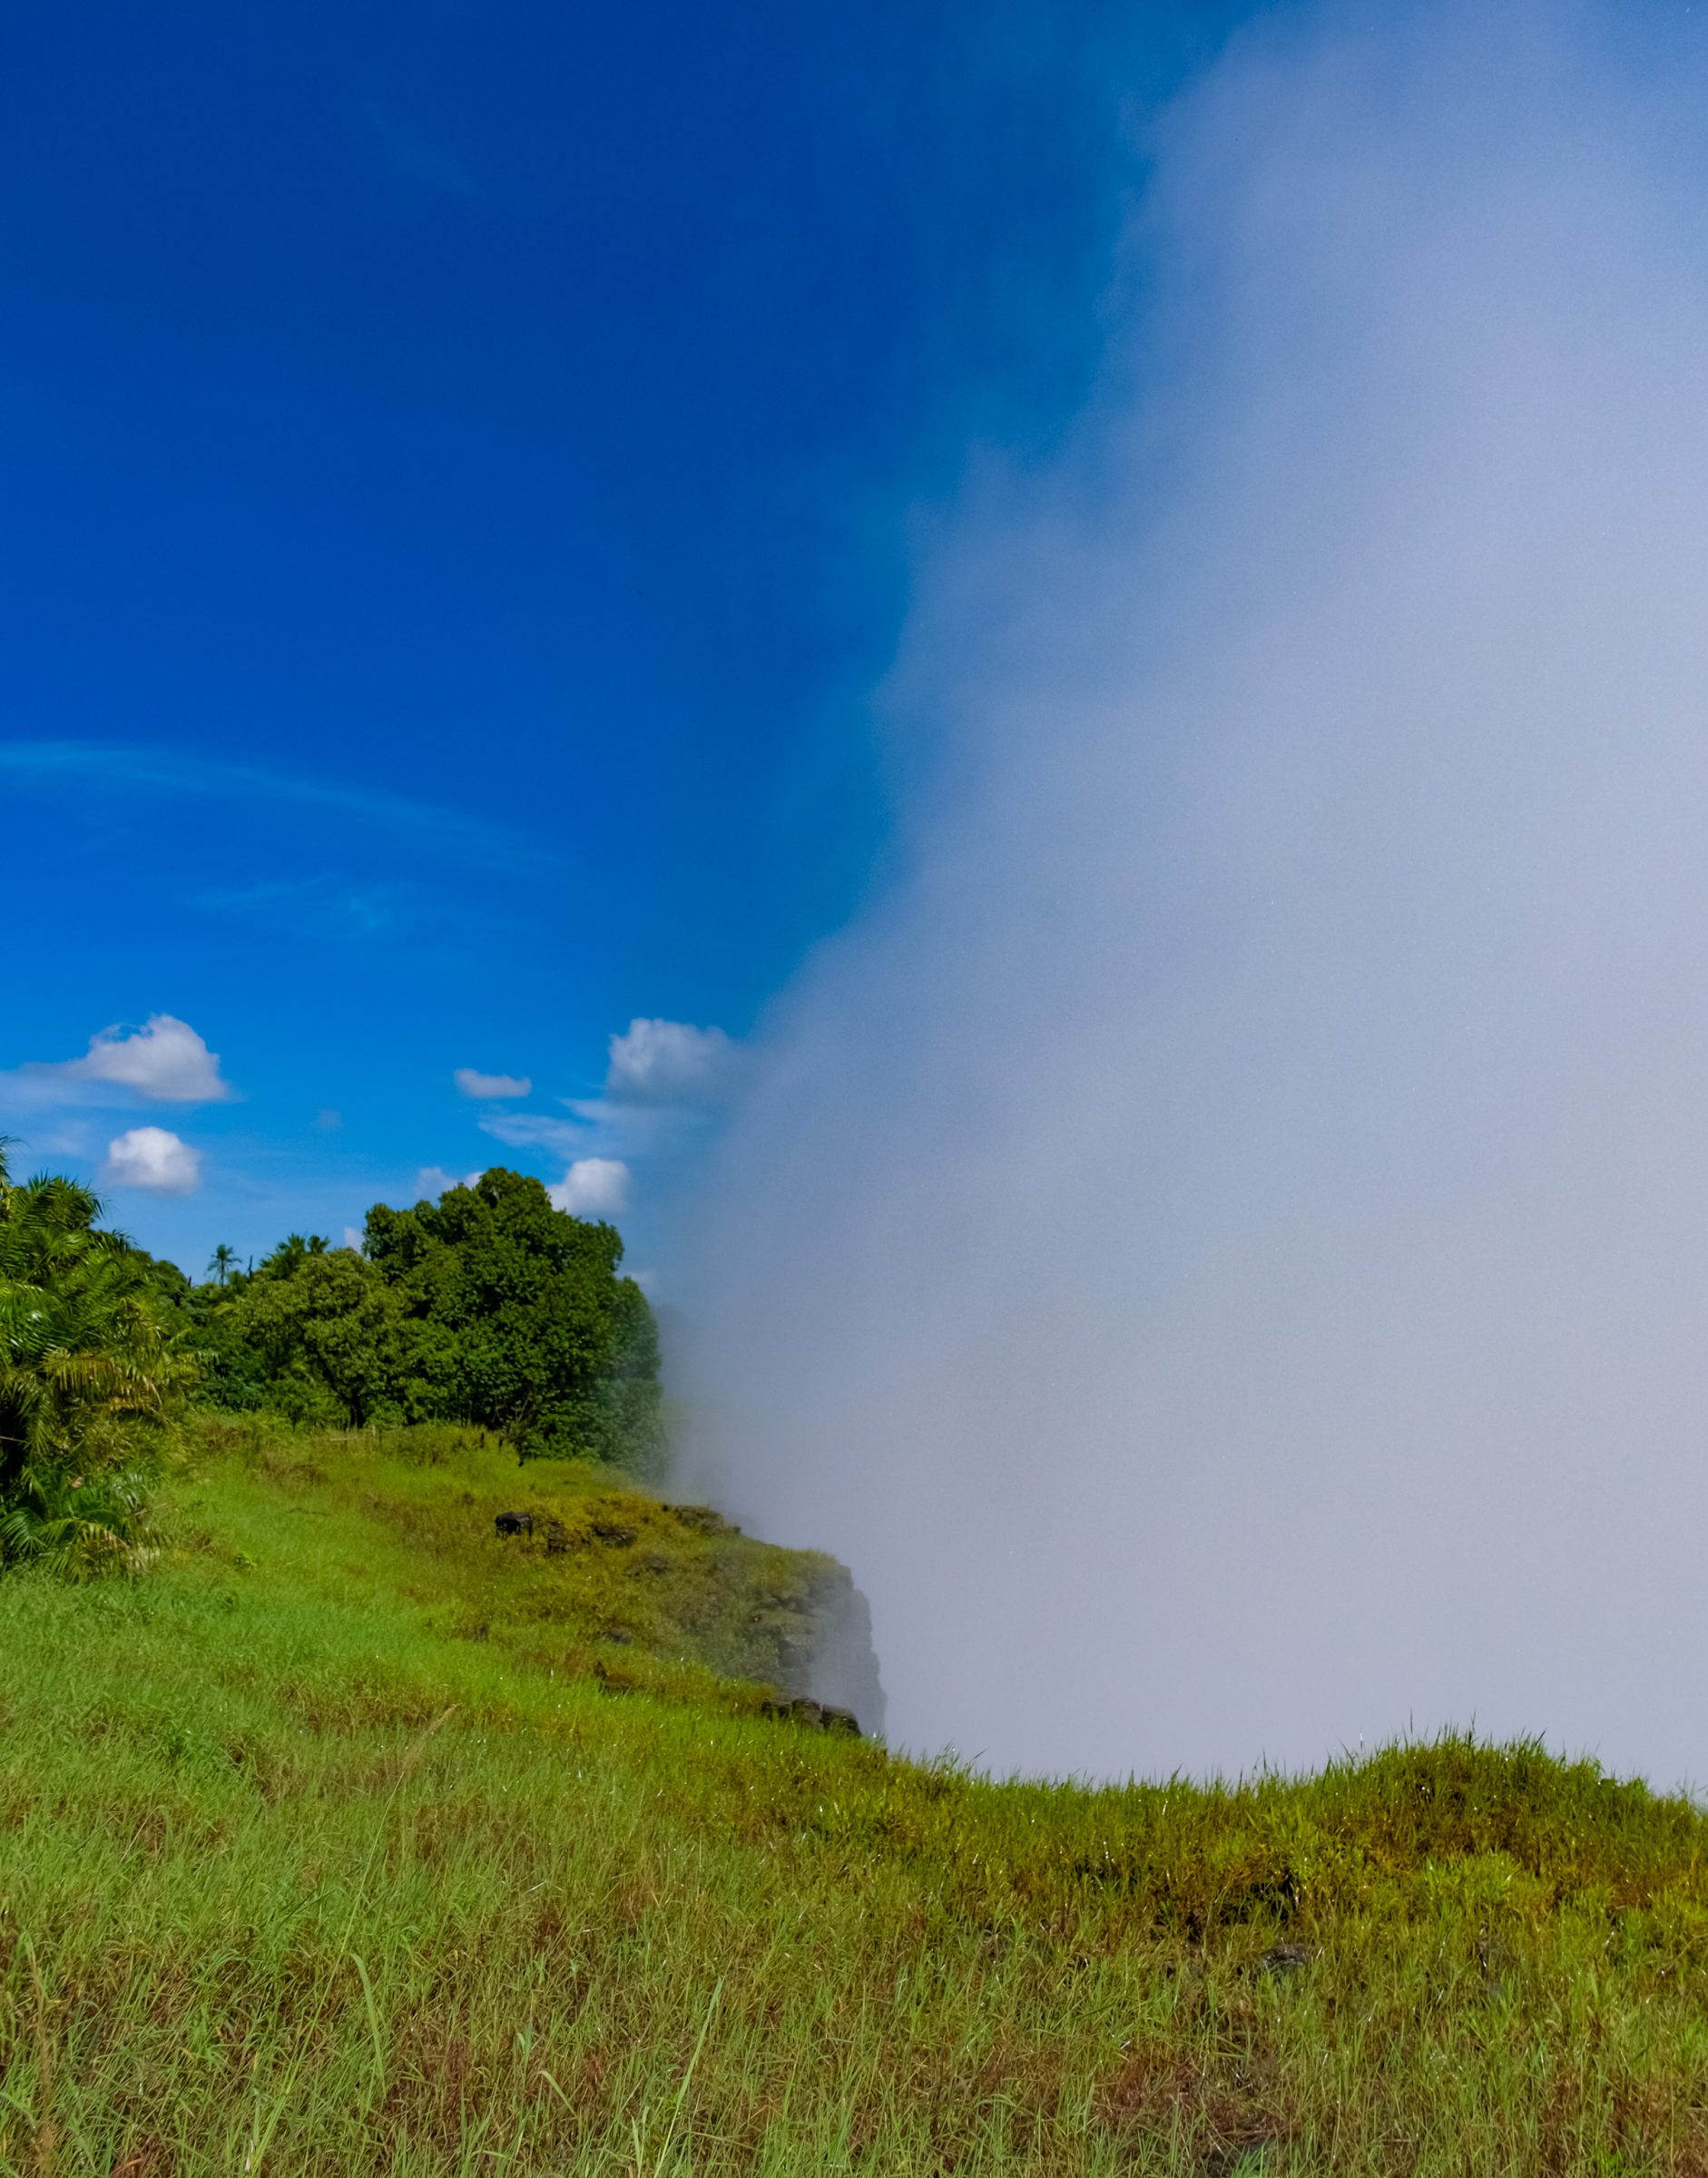 These are the huge mist clouds that you sometimes suddenly walk through